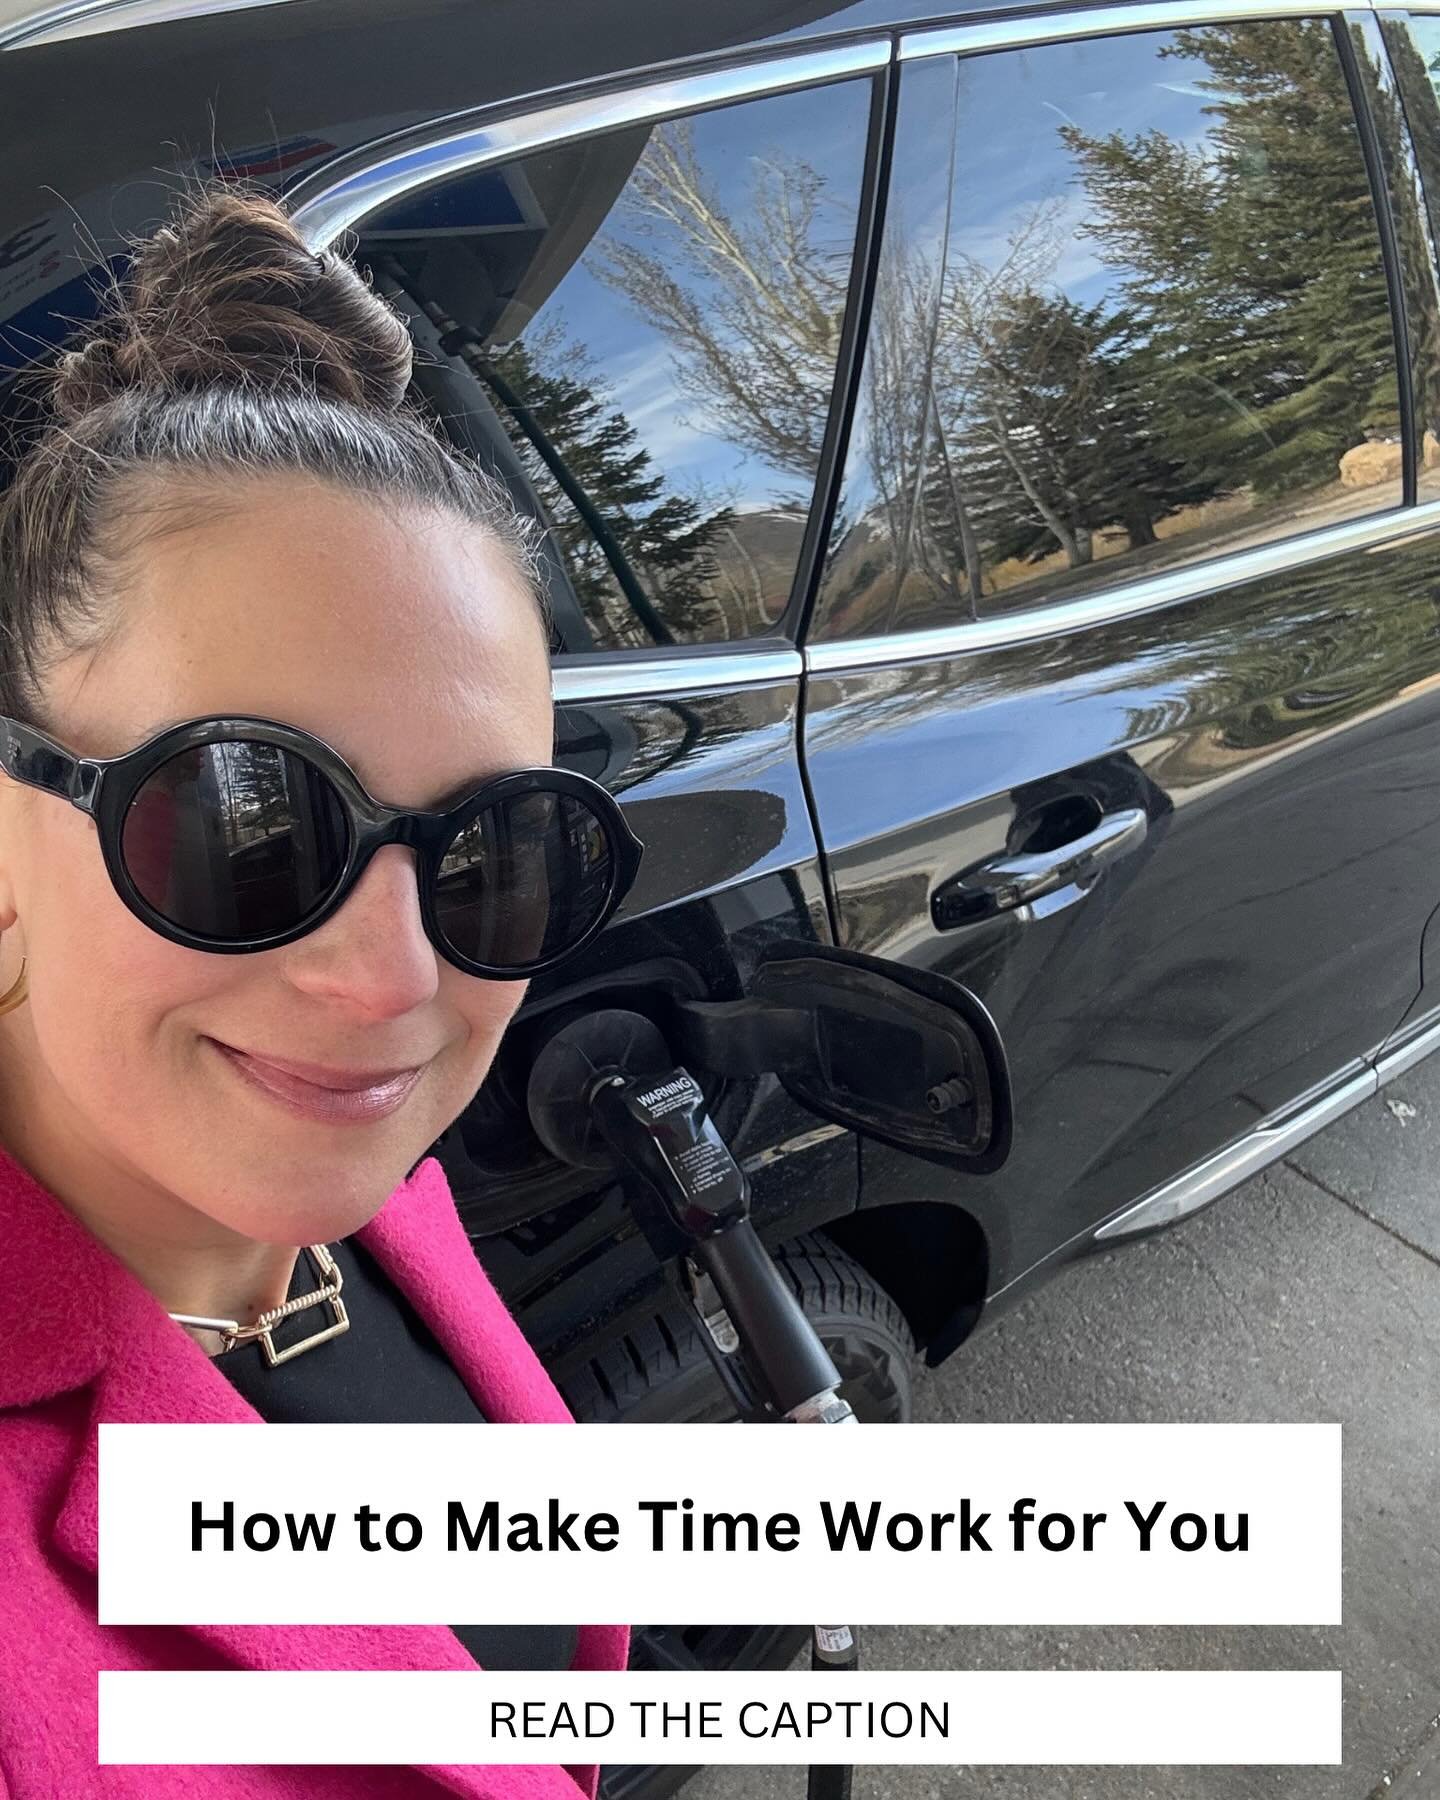 Time is so often a pain point in our lives.

What if you felt you had time freedom?

If you feel especially constricted by time, tune in. 

I want to simplify the time battle for you.

How you think about time impacts how you experience time, so we&r